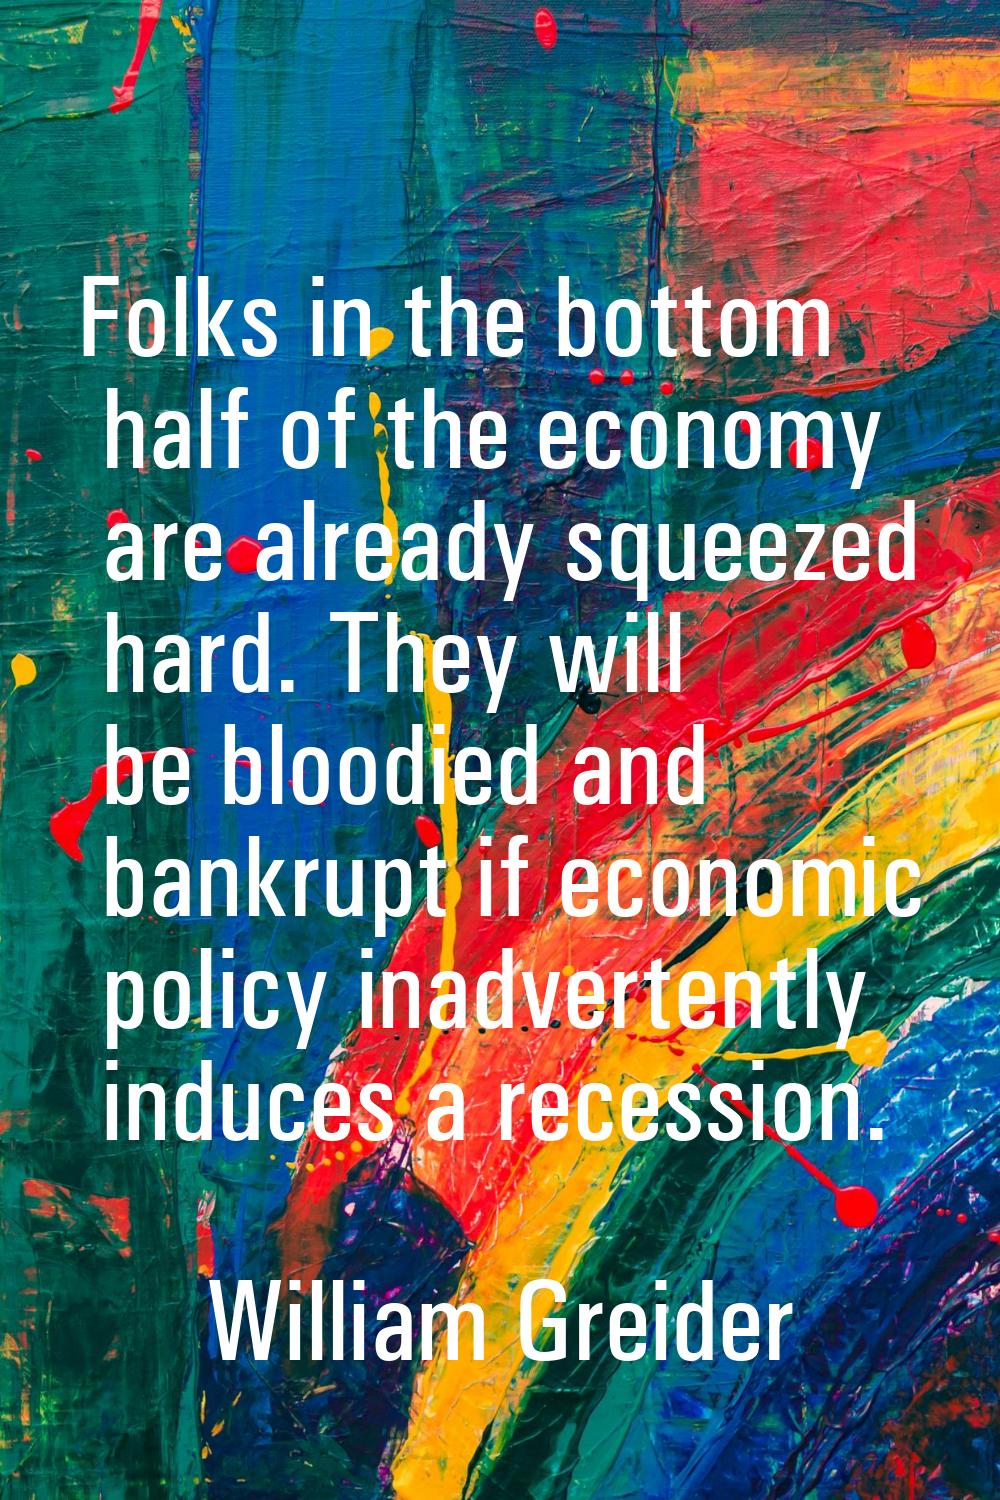 Folks in the bottom half of the economy are already squeezed hard. They will be bloodied and bankru